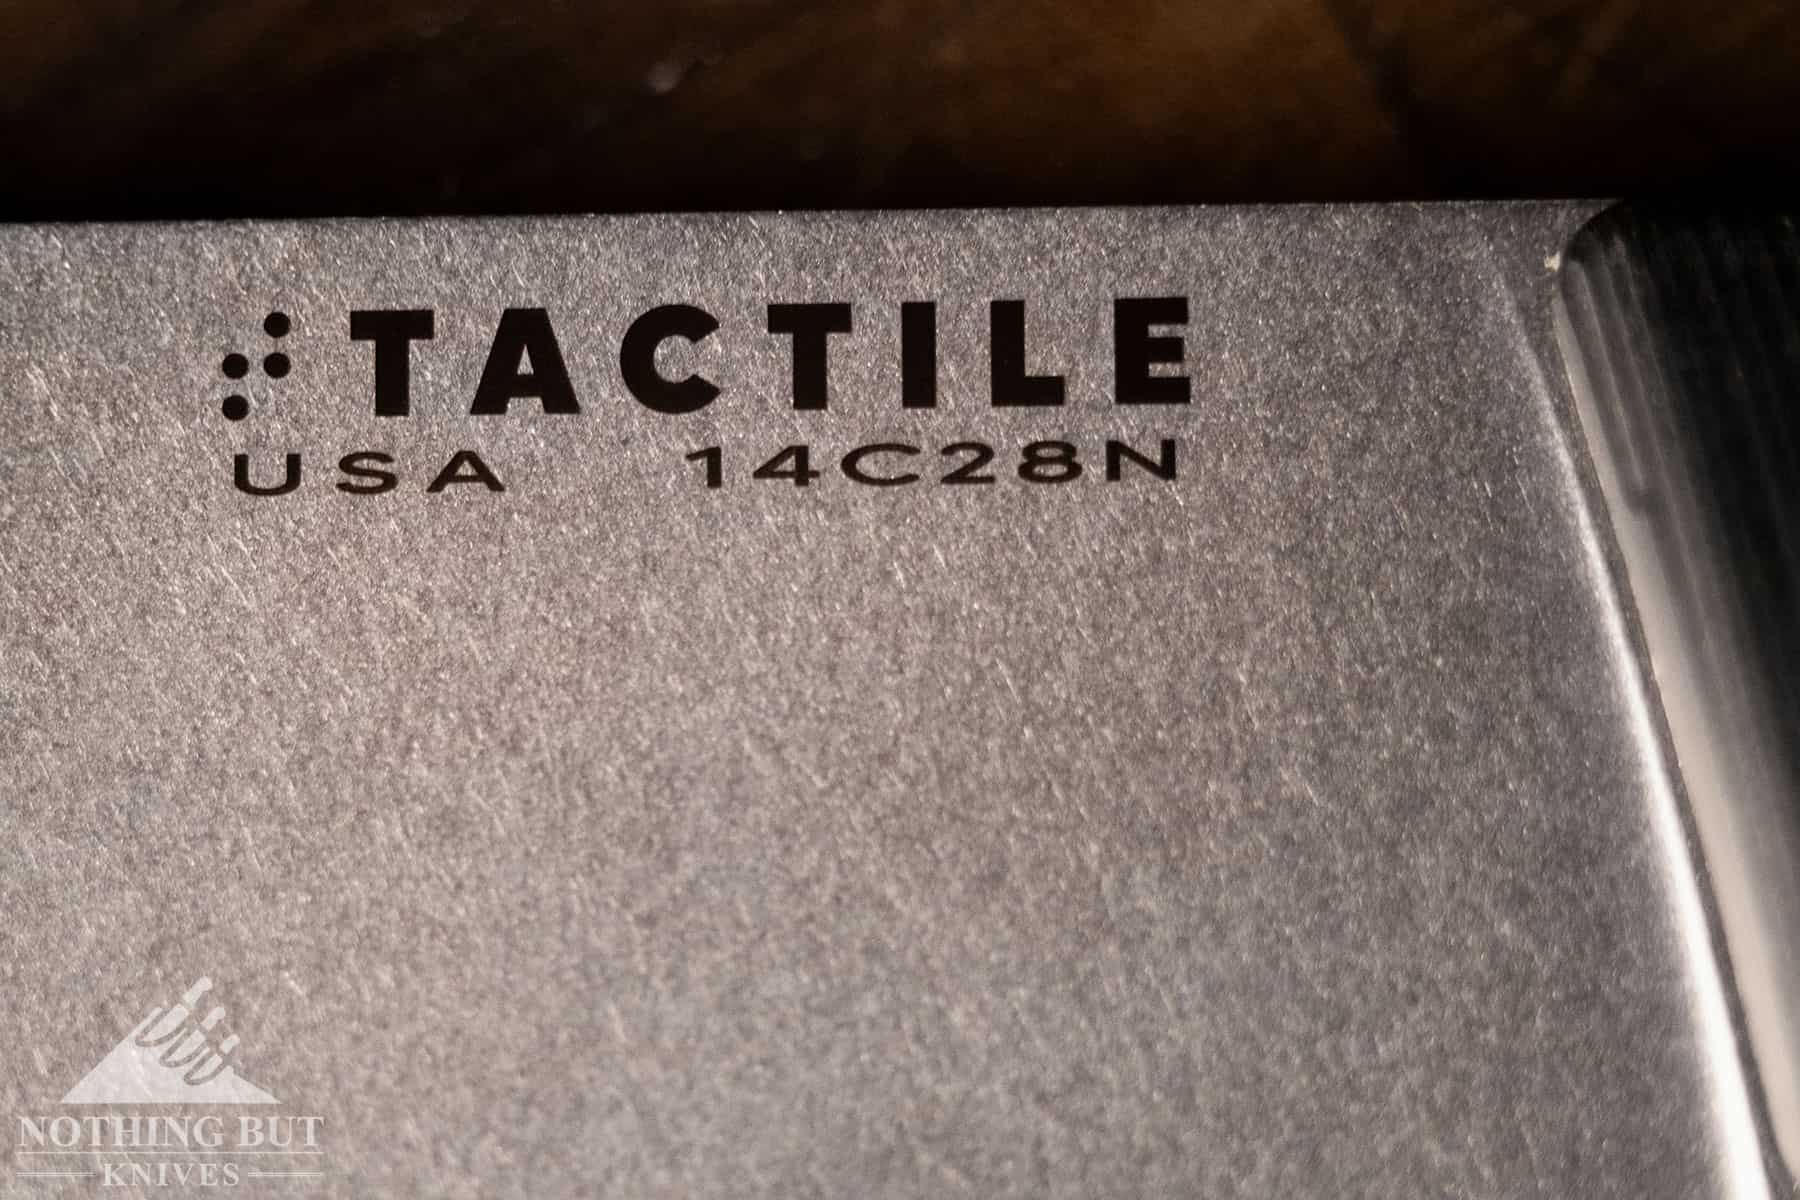 Macro shot of the Tactile logo and steel branding on the side of the chef knife blade.